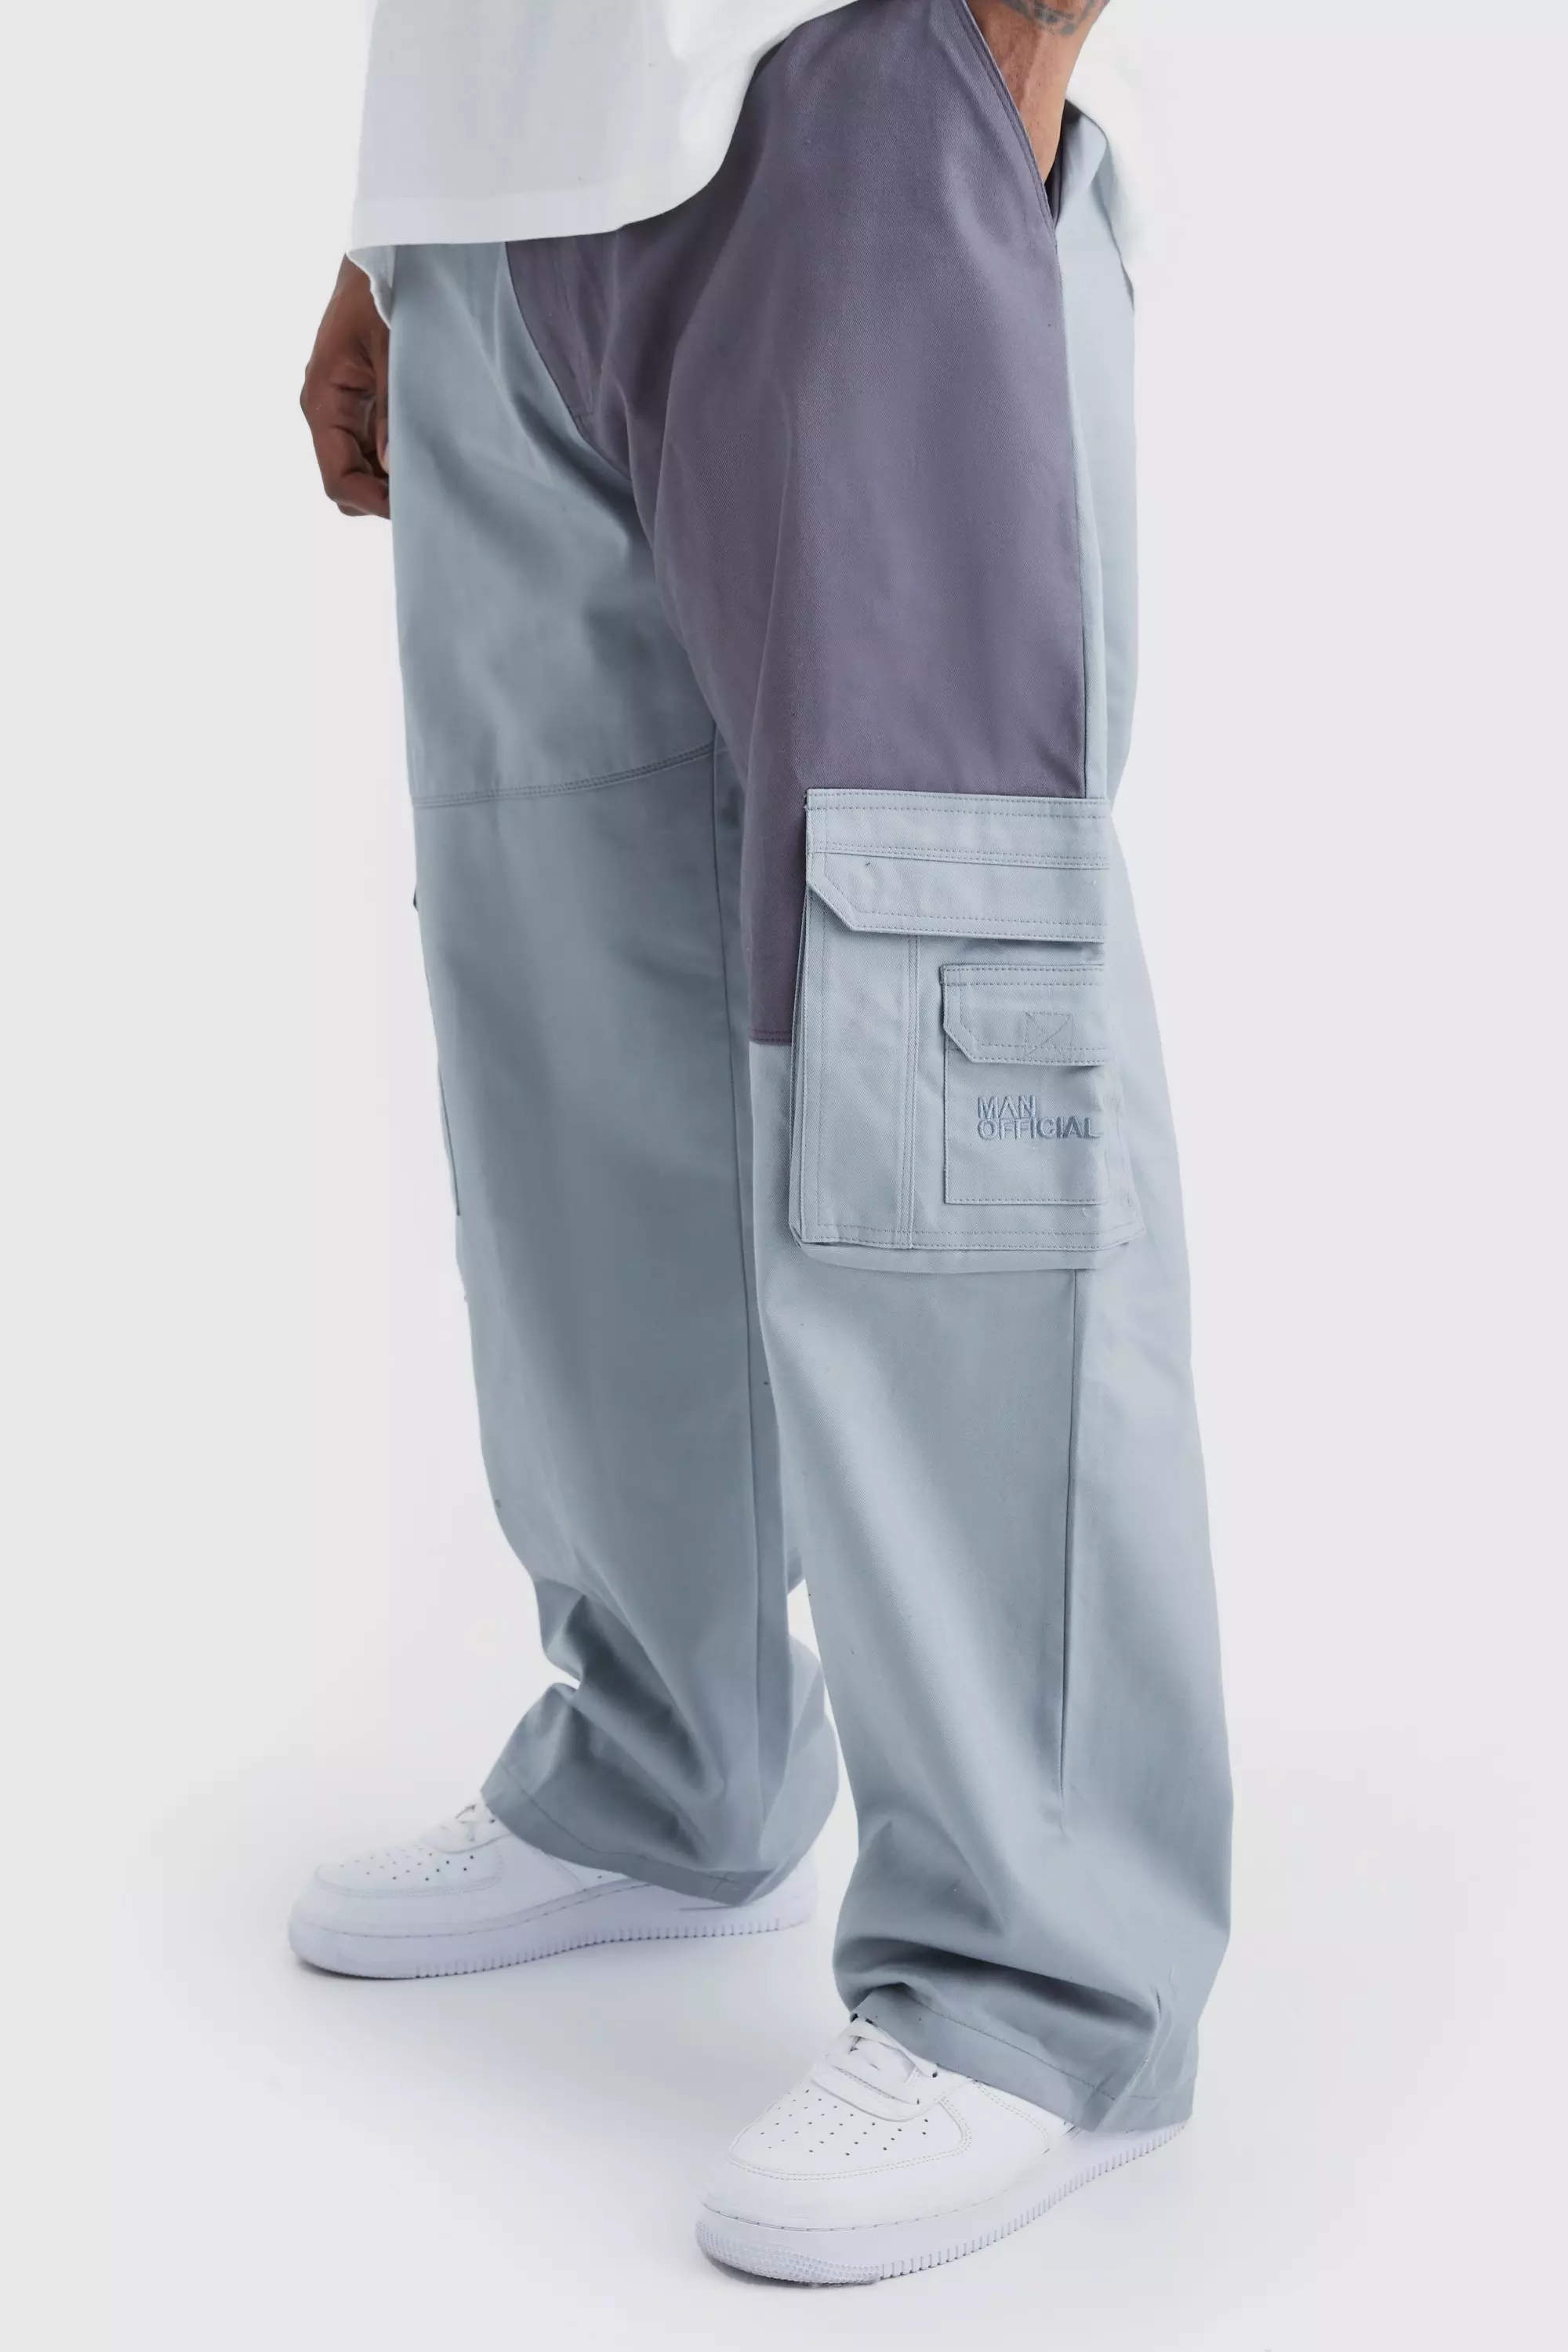 Plus Relaxed Fit Colour Block Tonal Branded Cargo Pants Charcoal